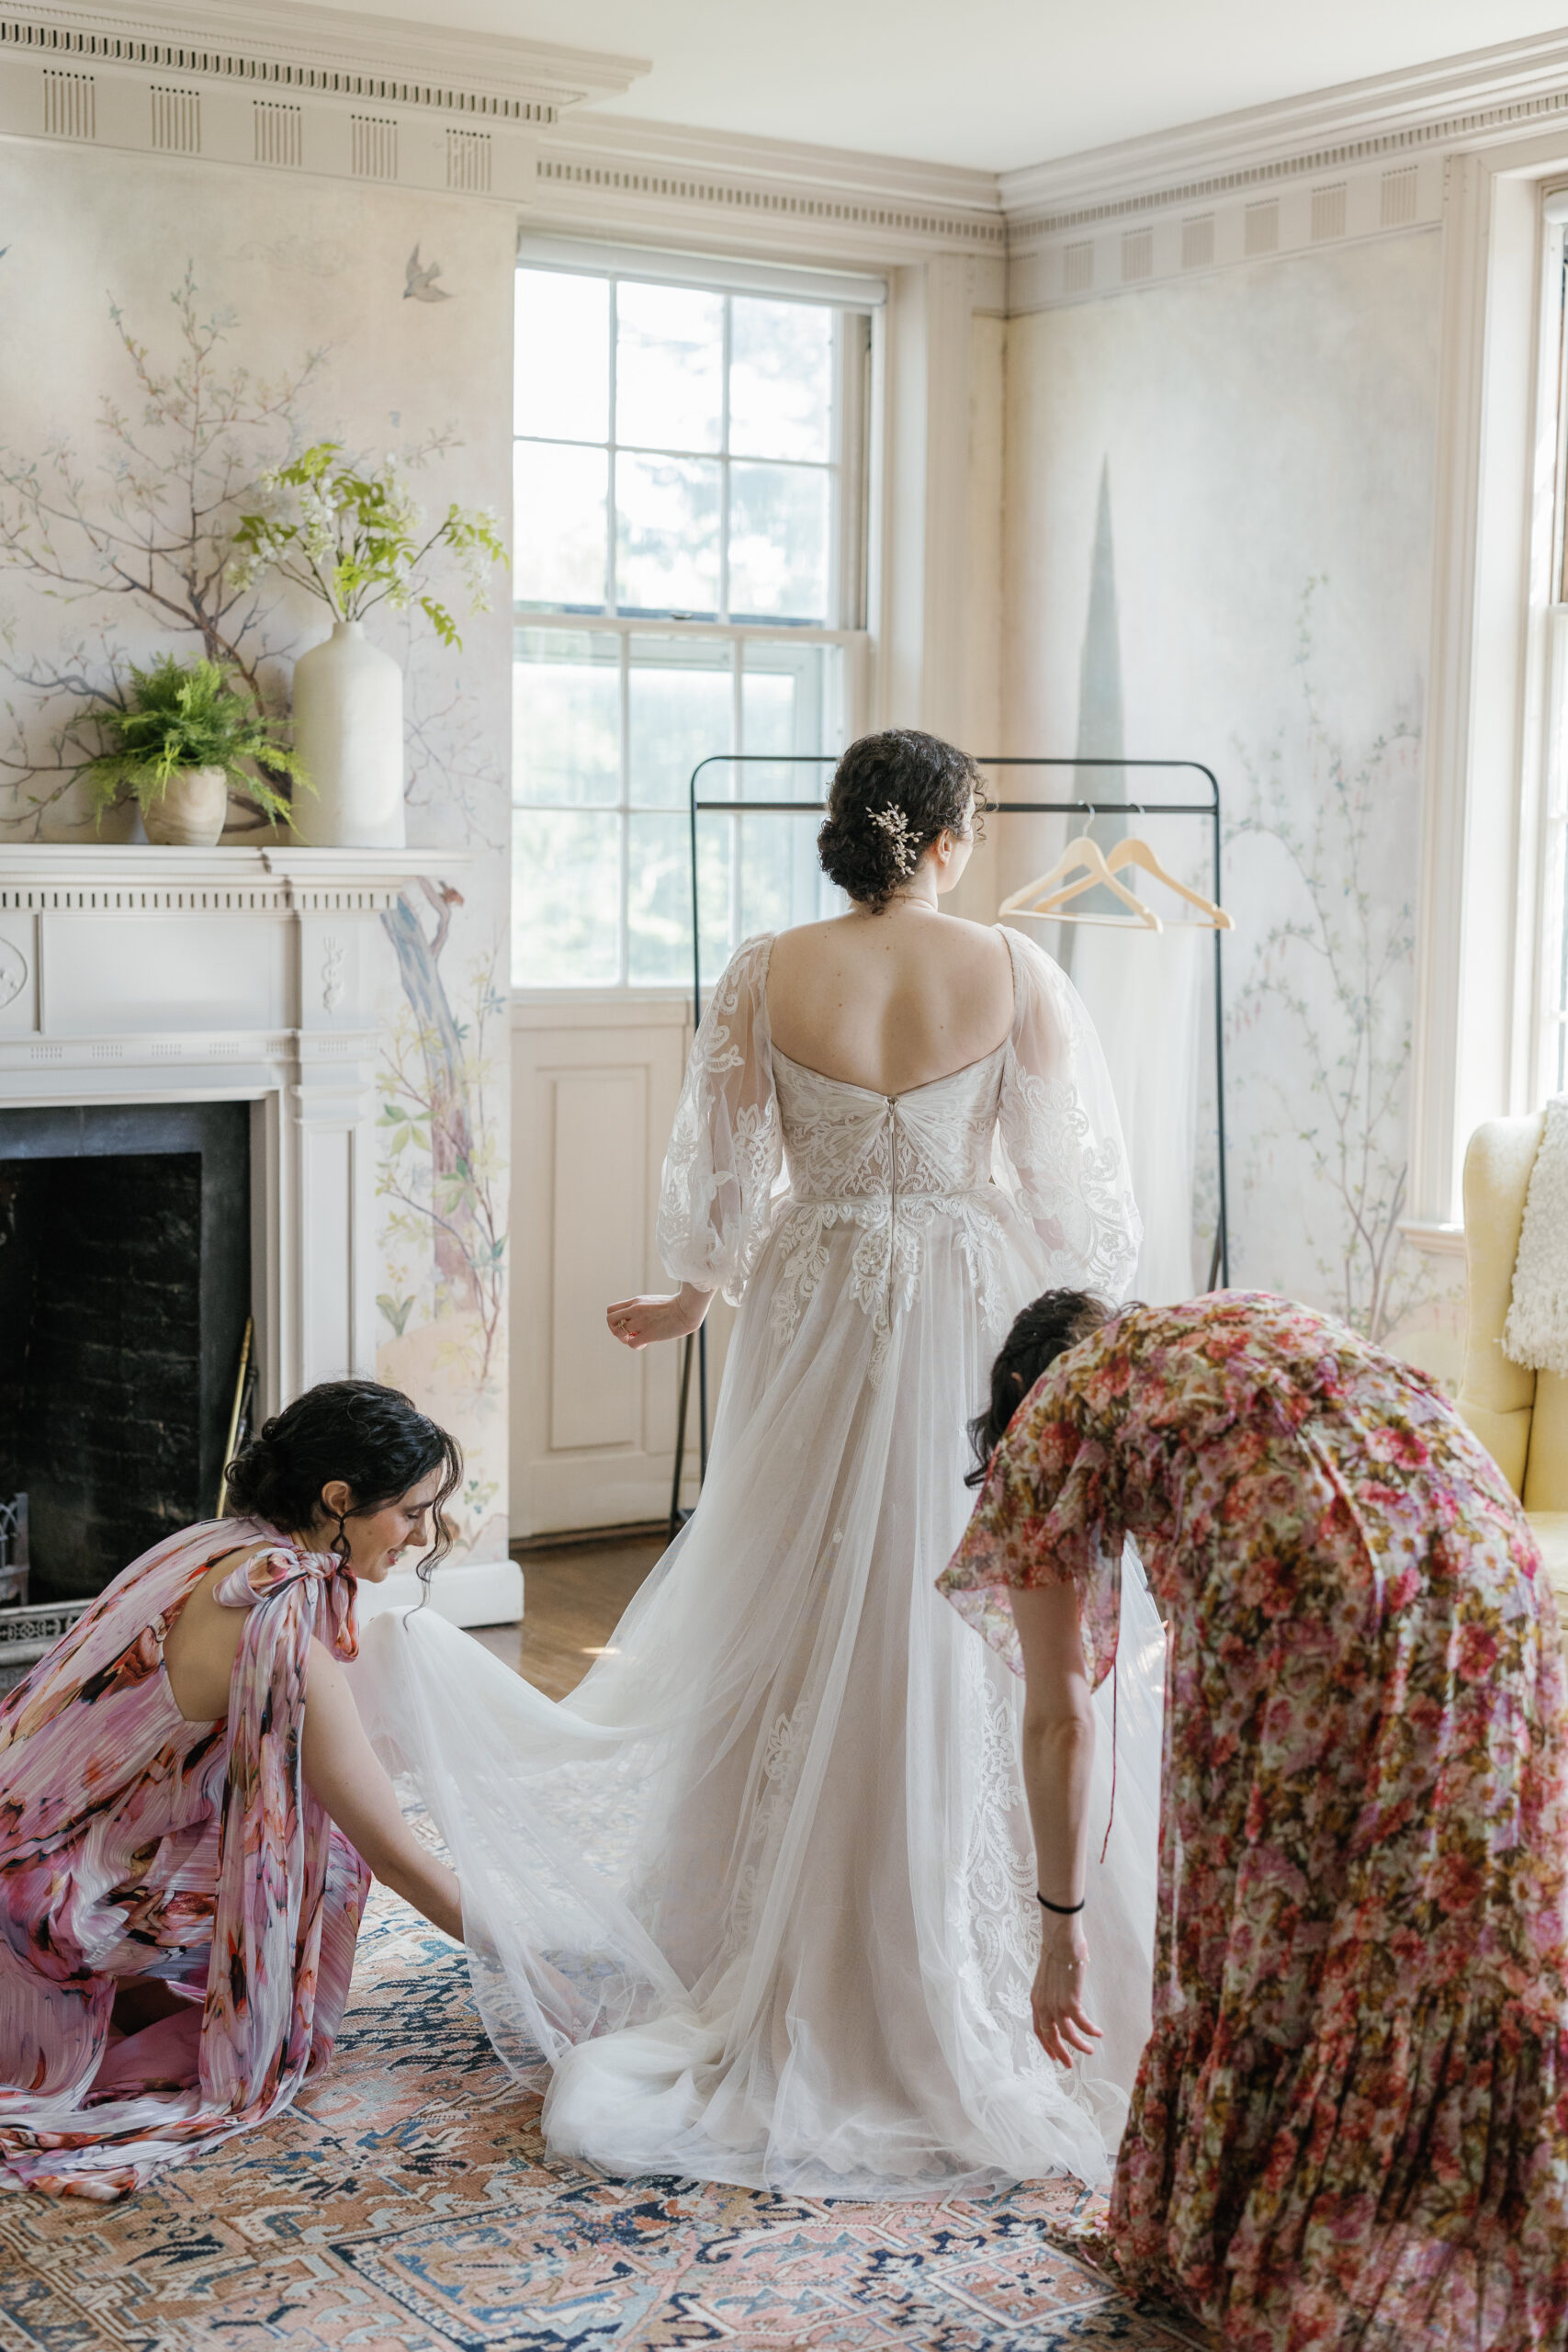 Bridesmaids fix the train of a bride's dress as she gets ready